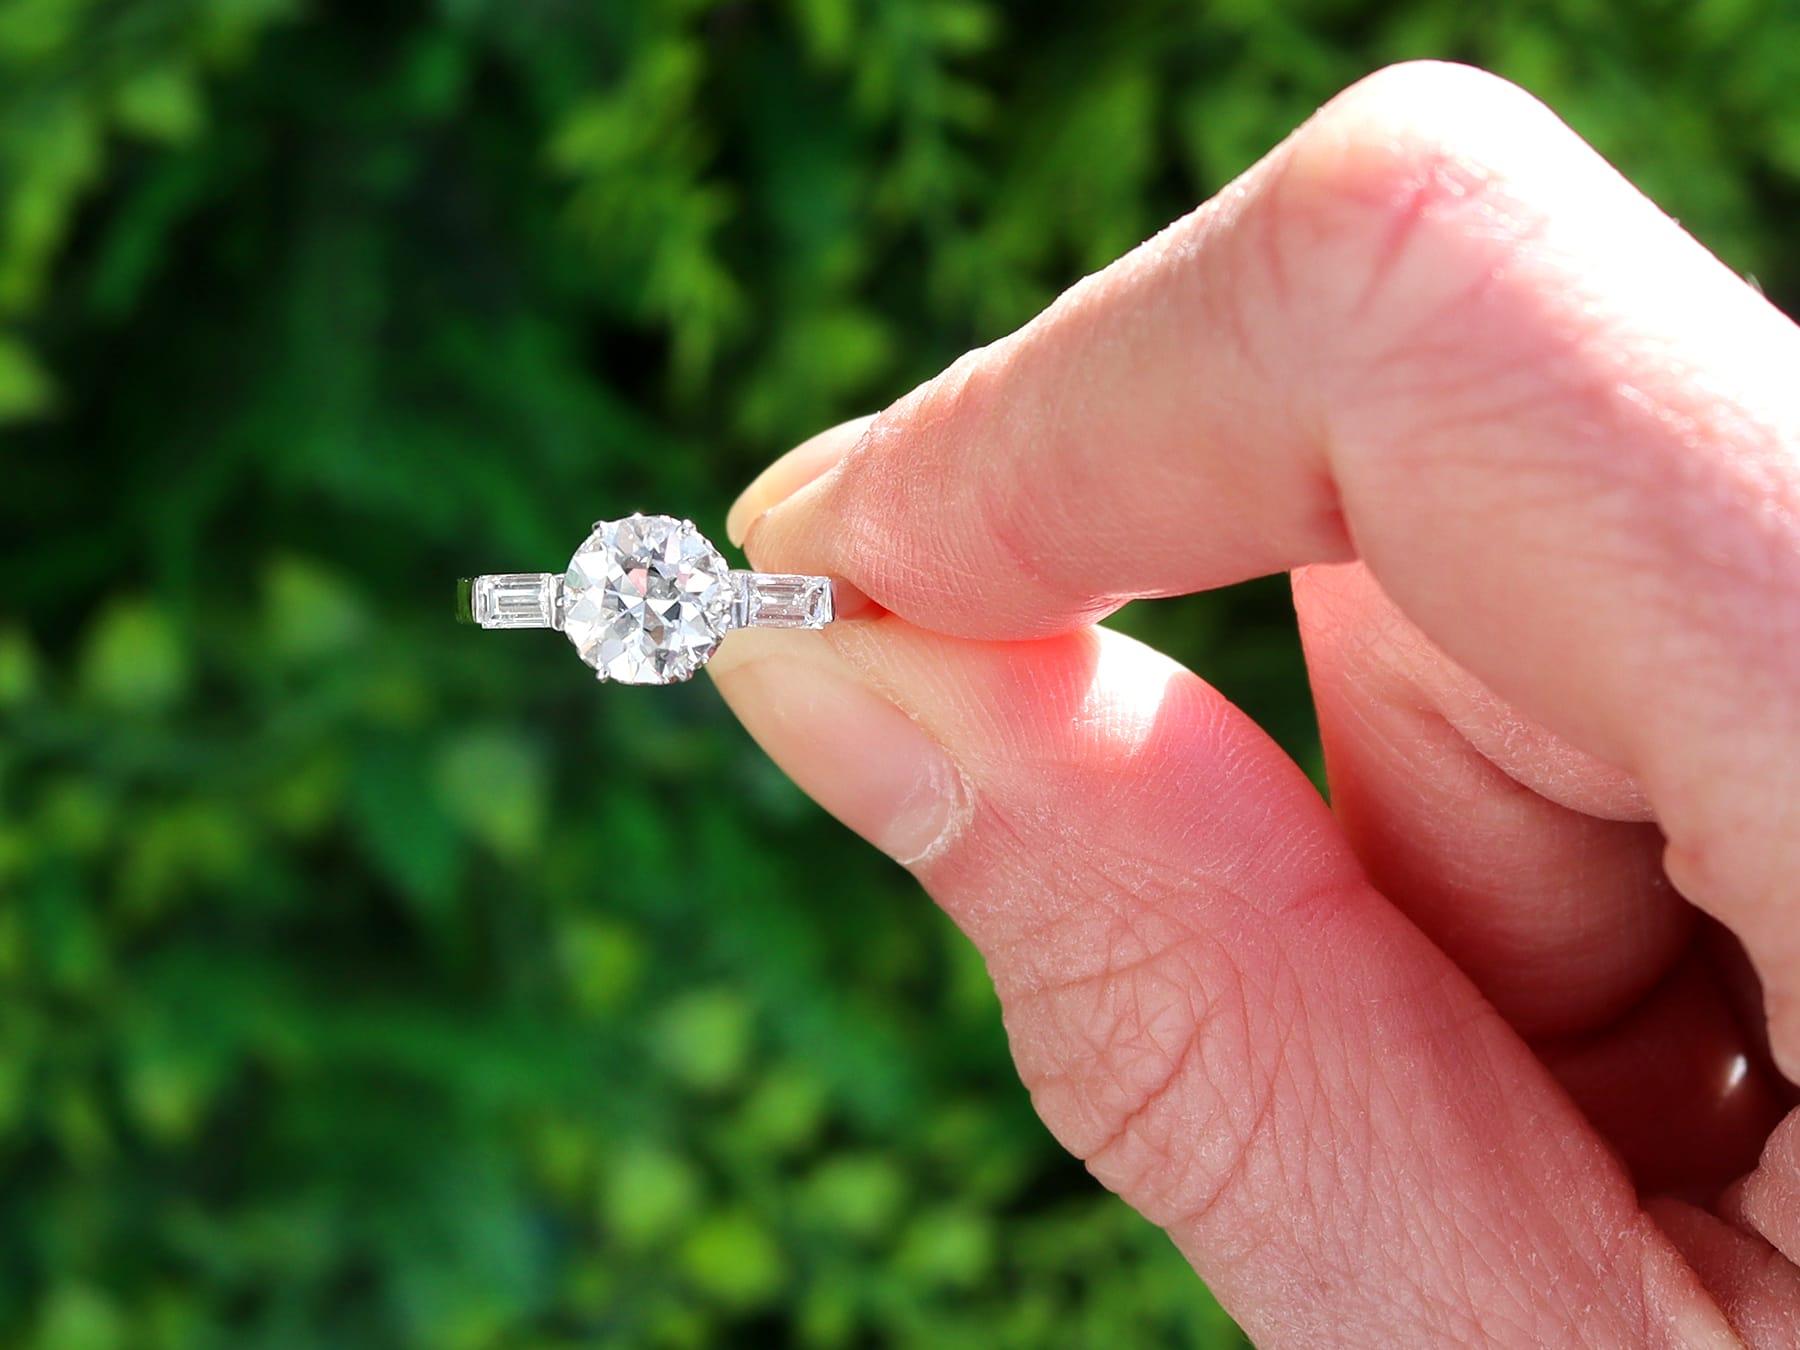 A stunning, fine and impressive antique 1.32 carat diamond and platinum solitaire ring with baguette side stones; part of our engagement ring collection.

This stunning, fine and impressive antique diamond ring has been crafted in platinum.

The